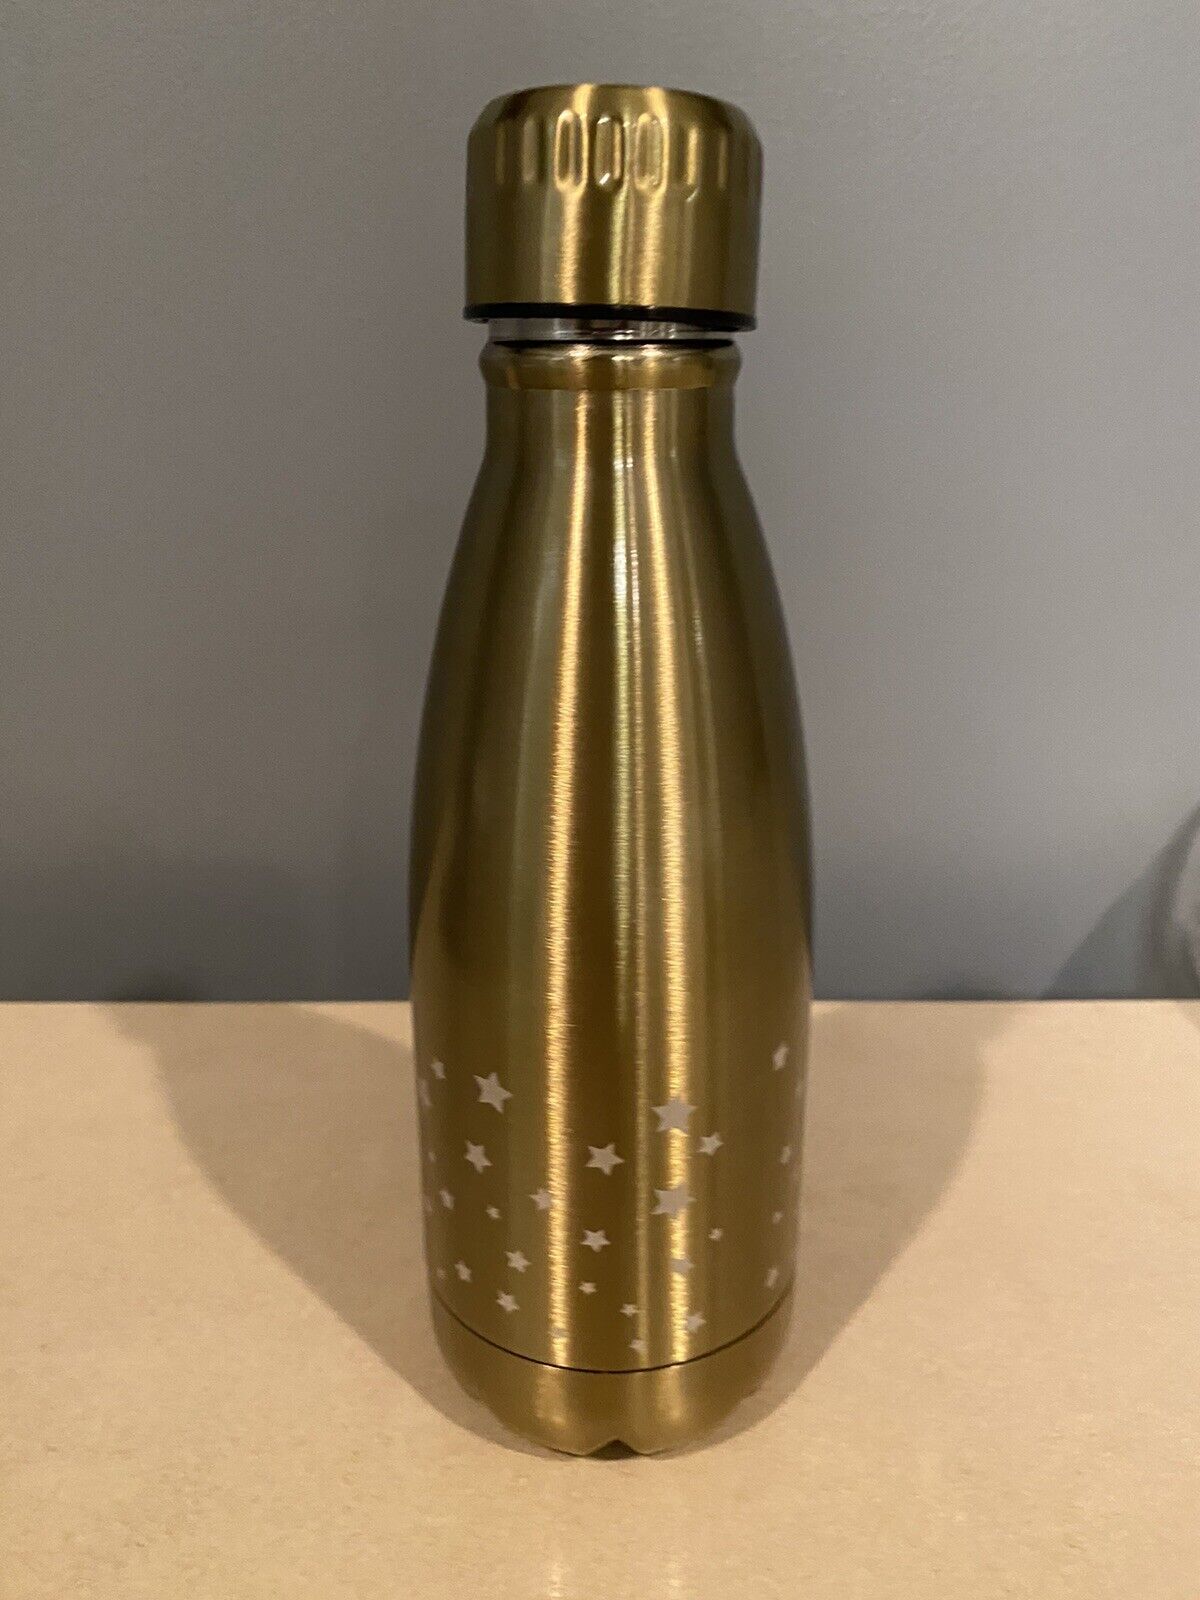 New Metal Reusable Water Bottle, Medium Size, Gold With Stars